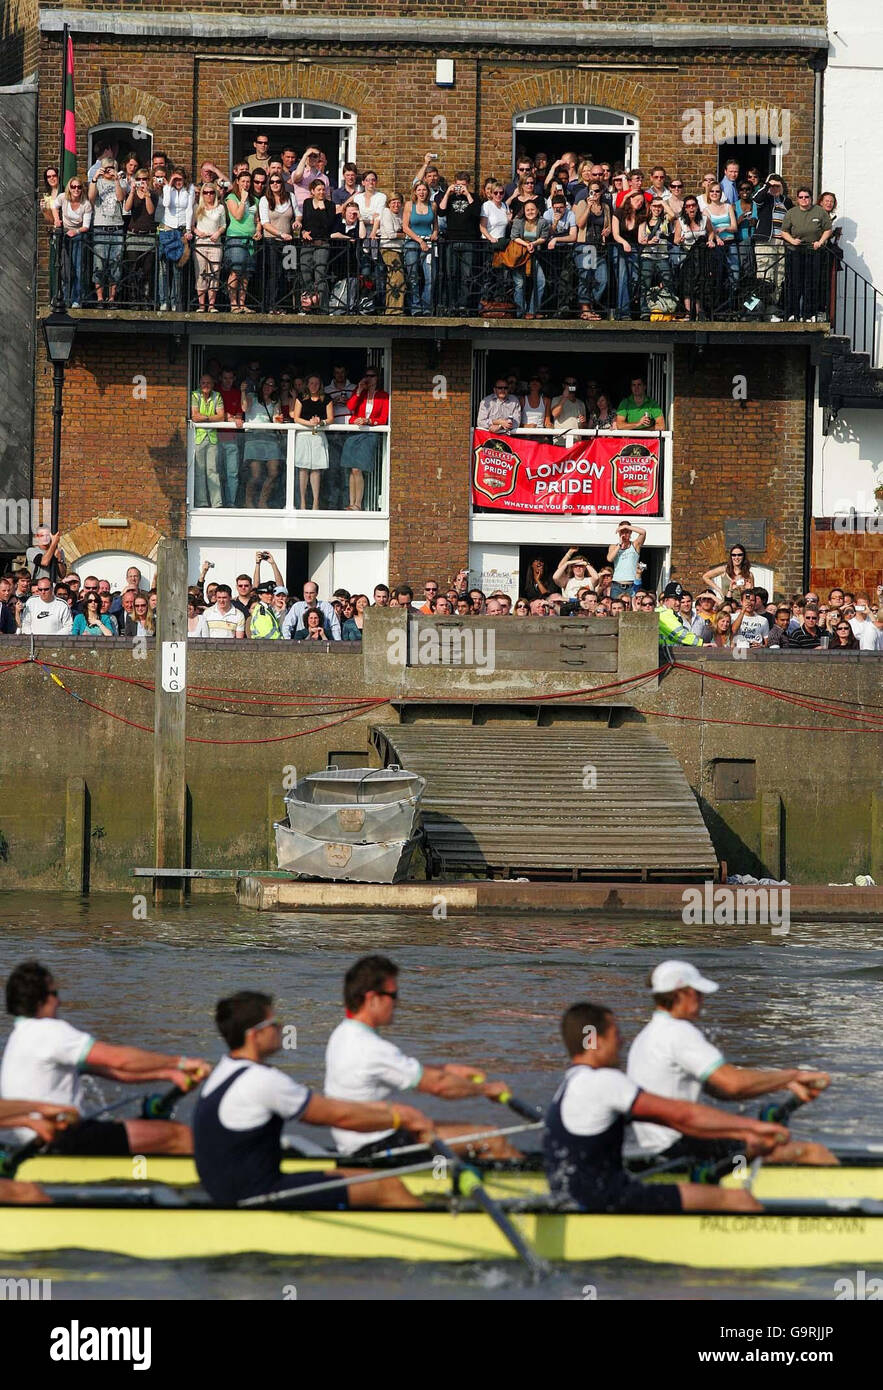 Supporters cheer on the Oxford and Cambridge University rowing teams at Hammersmith during the 153rd Boat Race today. Stock Photo